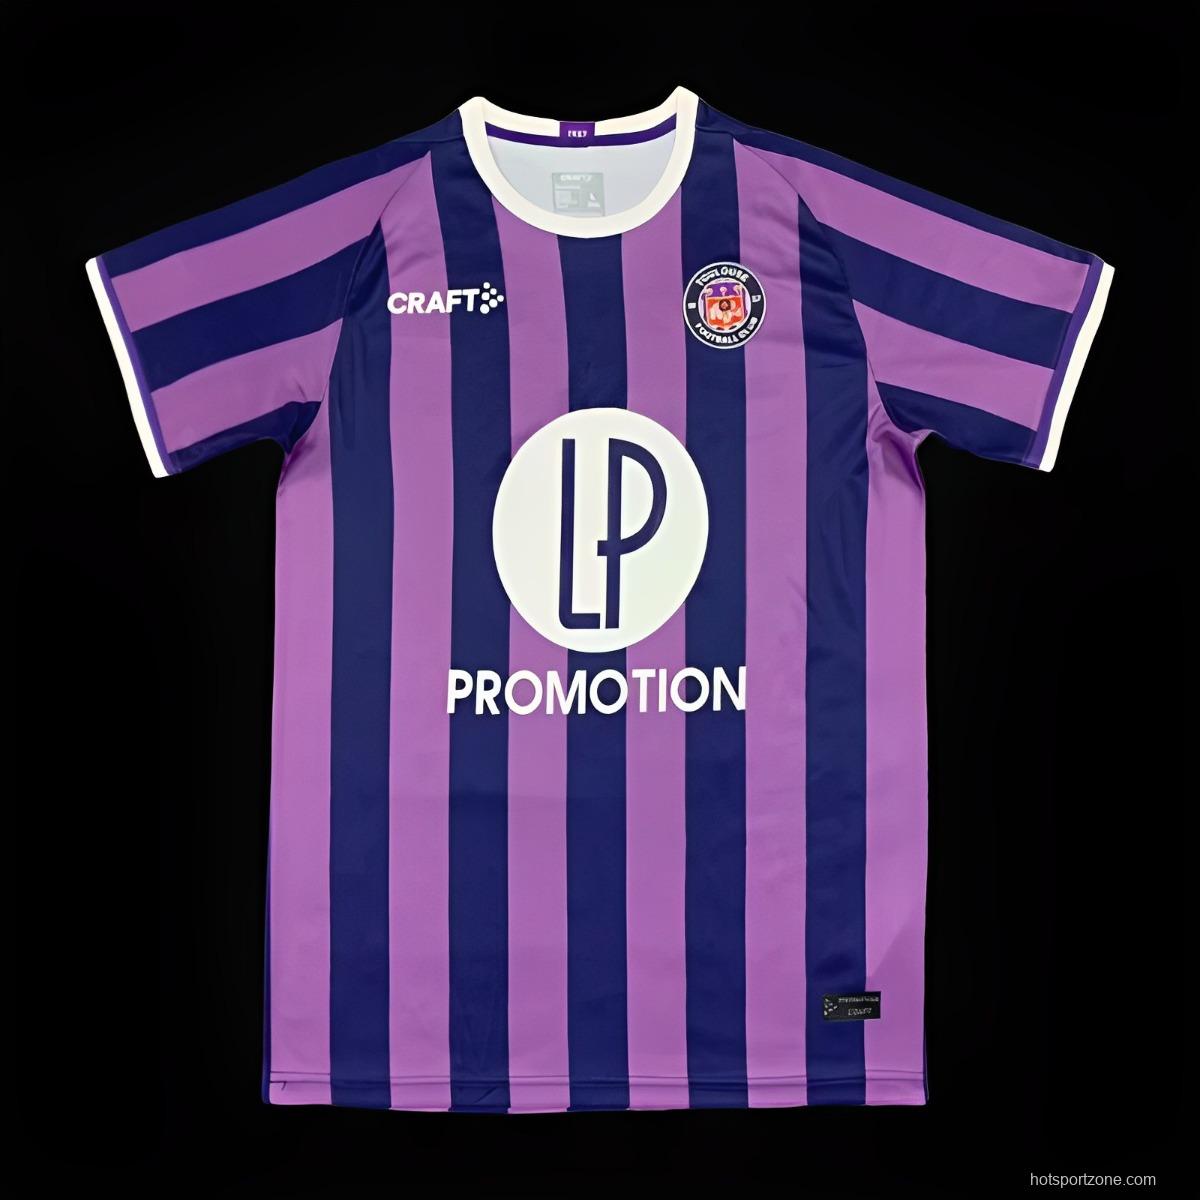 23/24 Toulouse Away Jersey